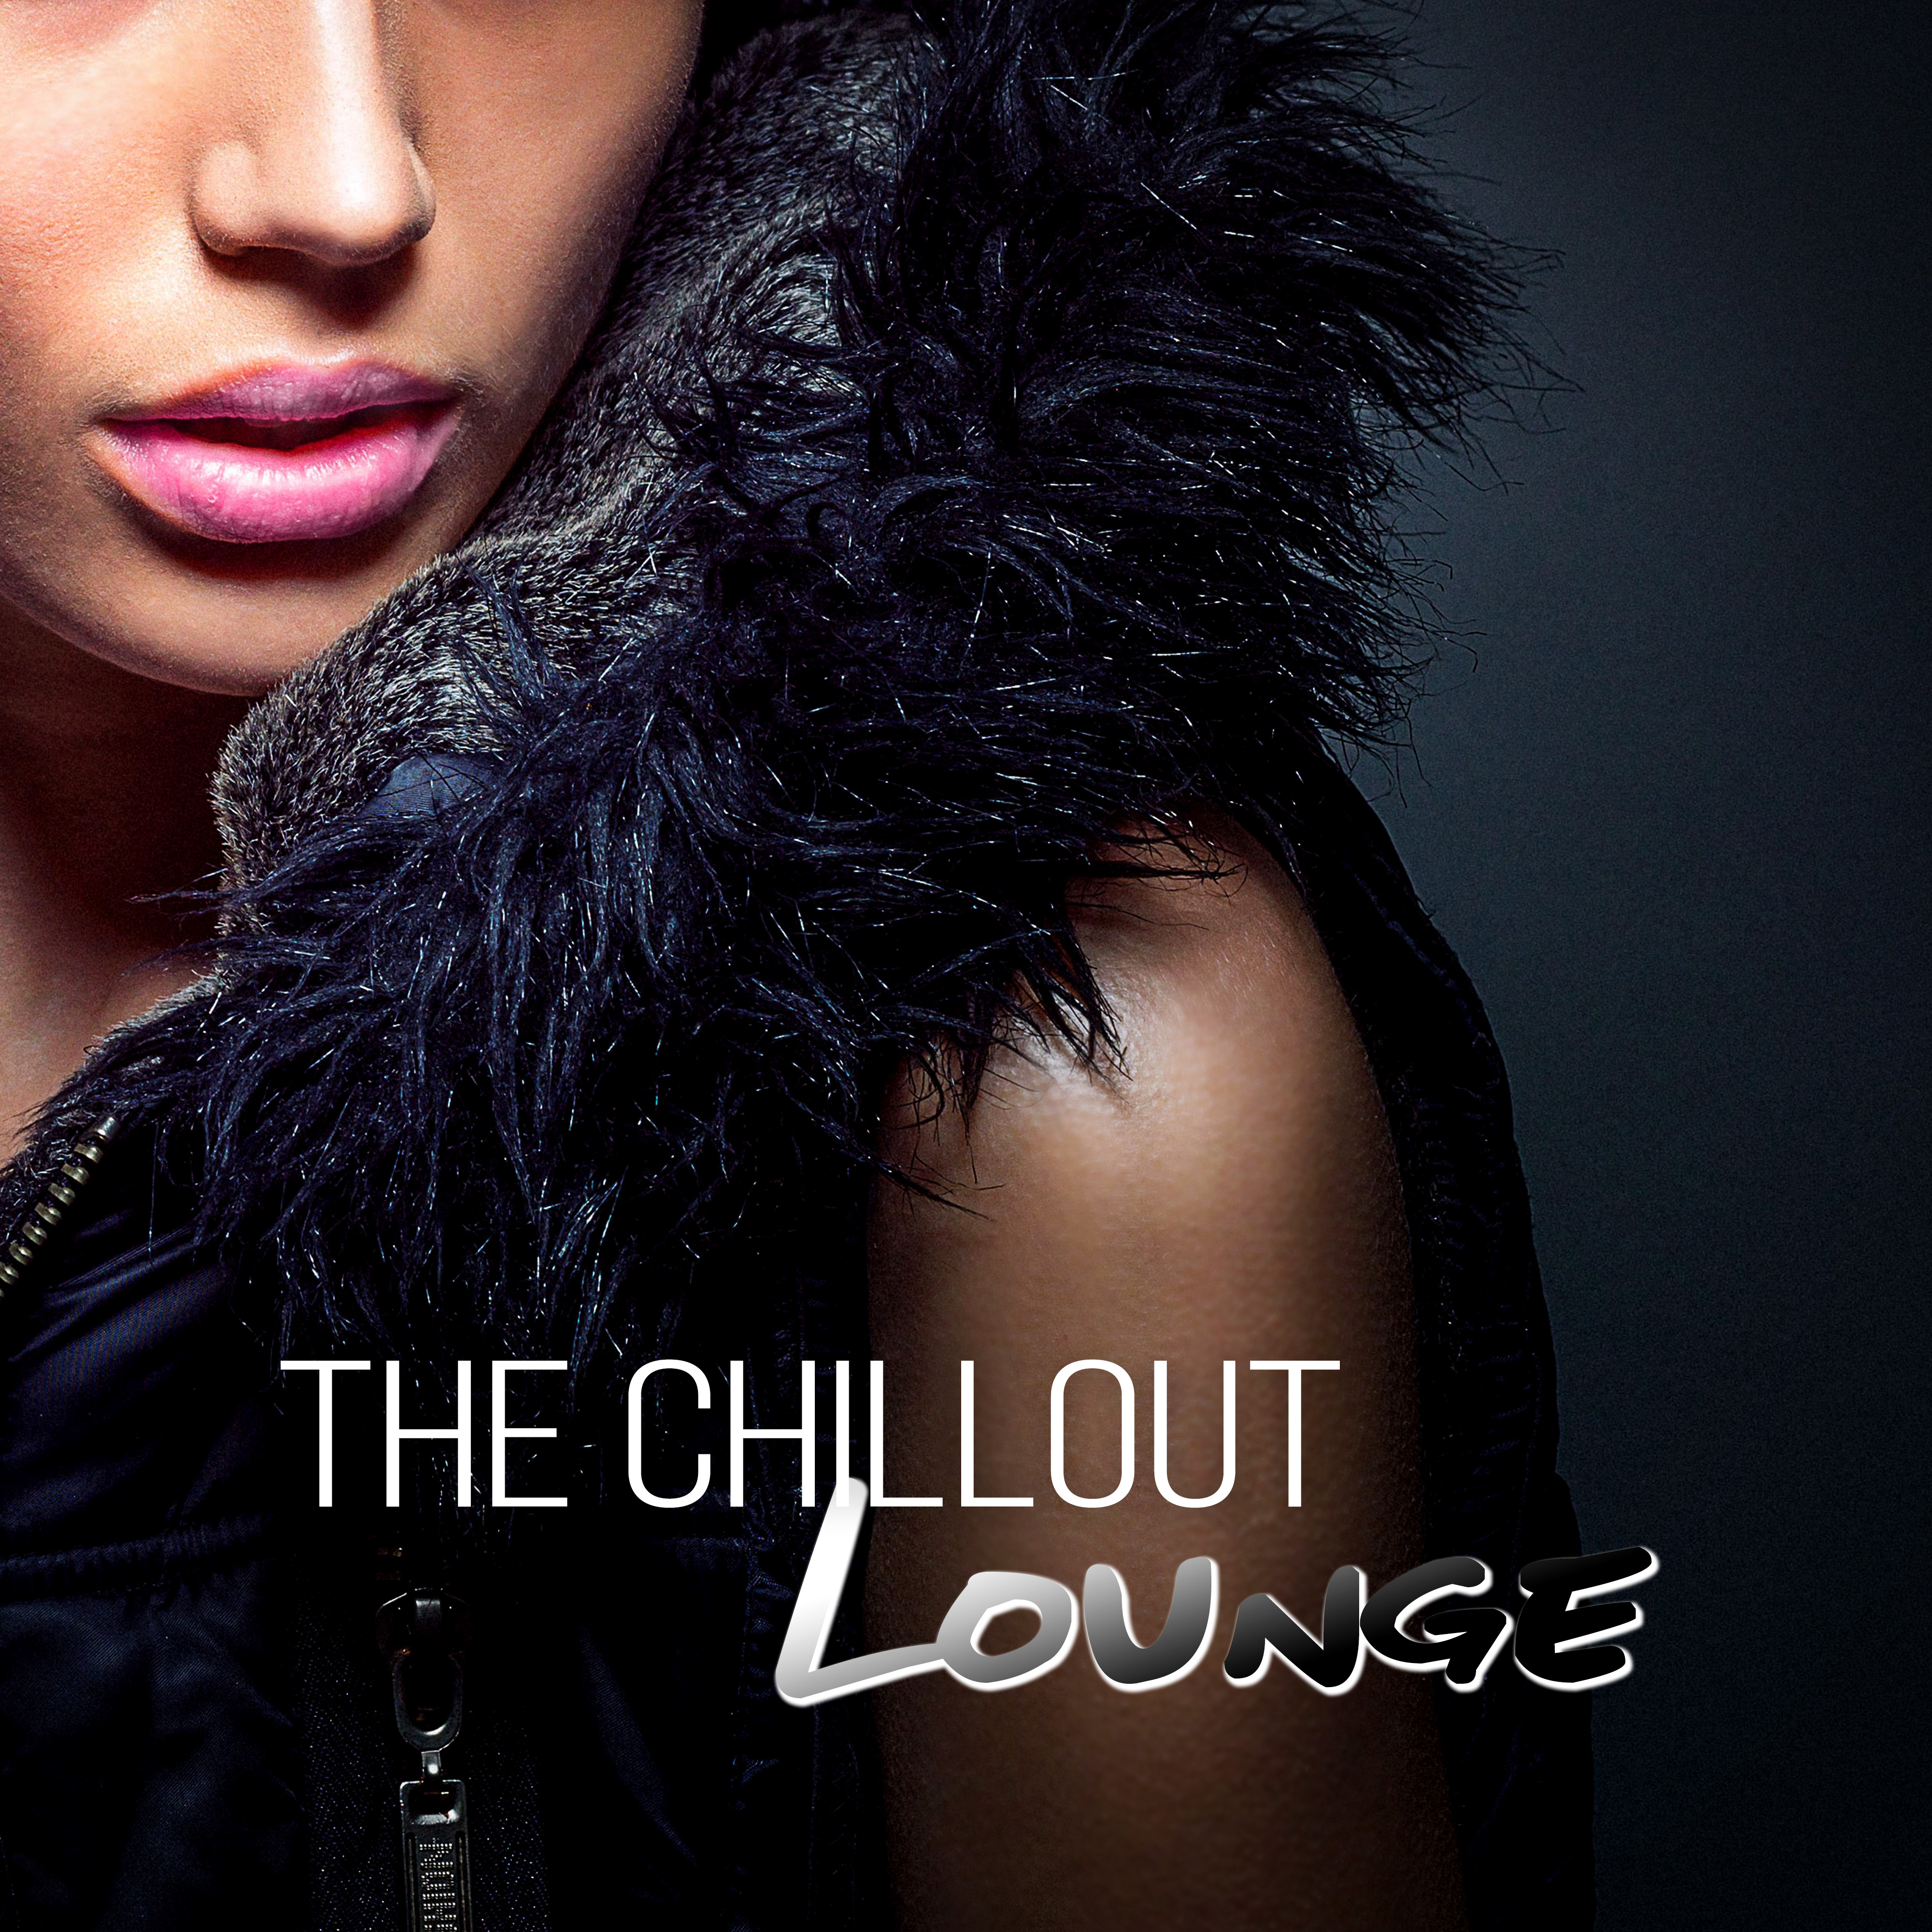 The Chillout Lounge - Best Chillout & Lounge Music 2015, Instrumental Electronic Music, Summertime, Total Relax, Rest, Party Music, Relaxing Music